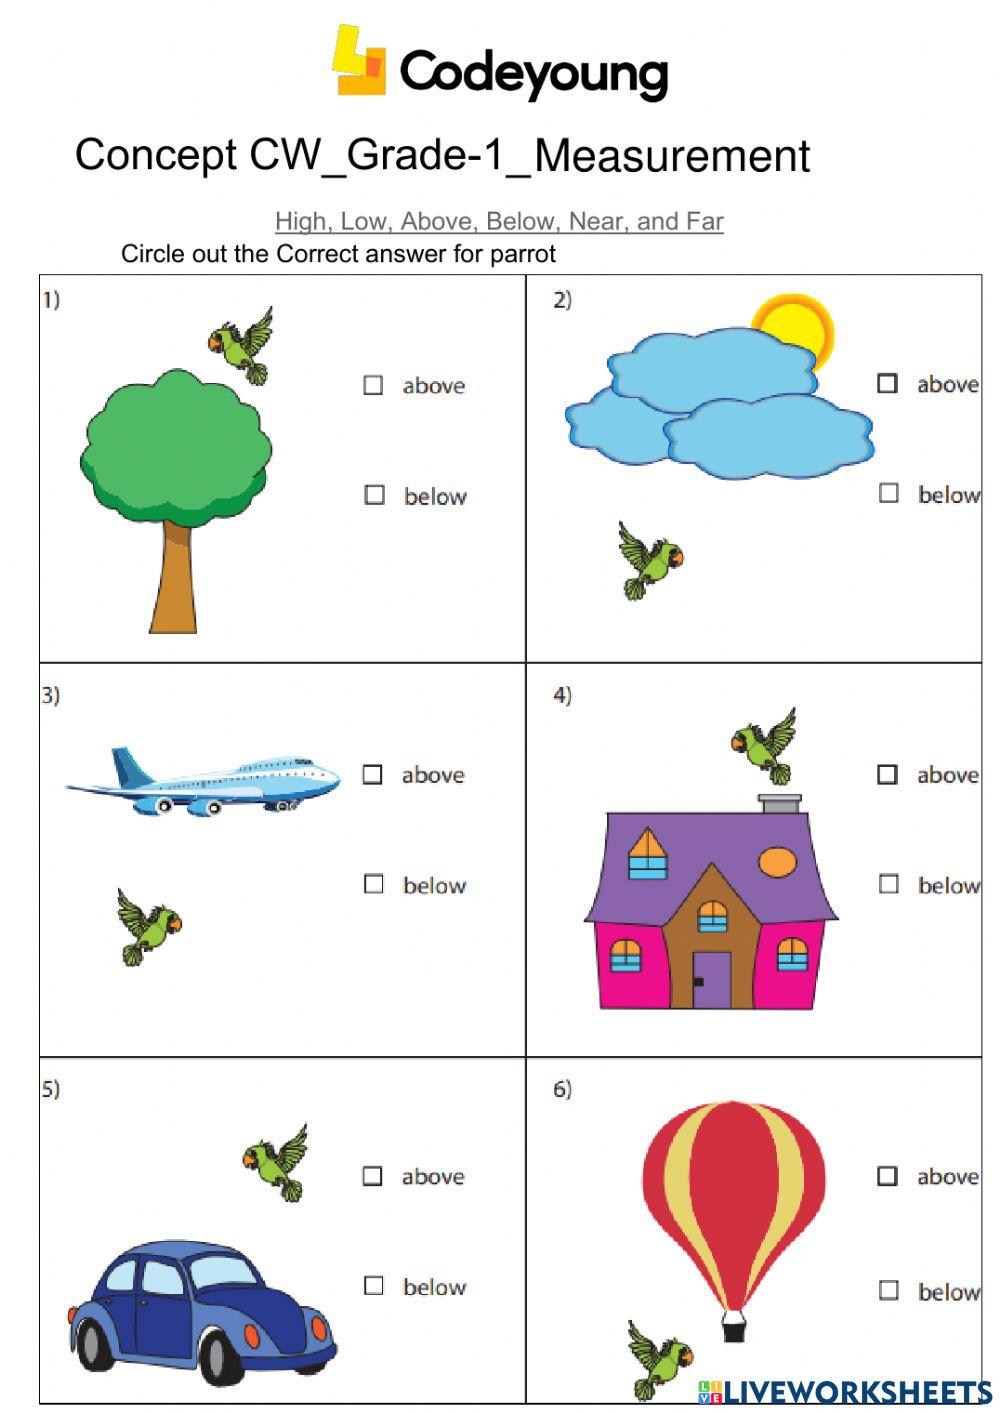 High, Low, Above, Below, Near, and Far-Concept CW worksheet